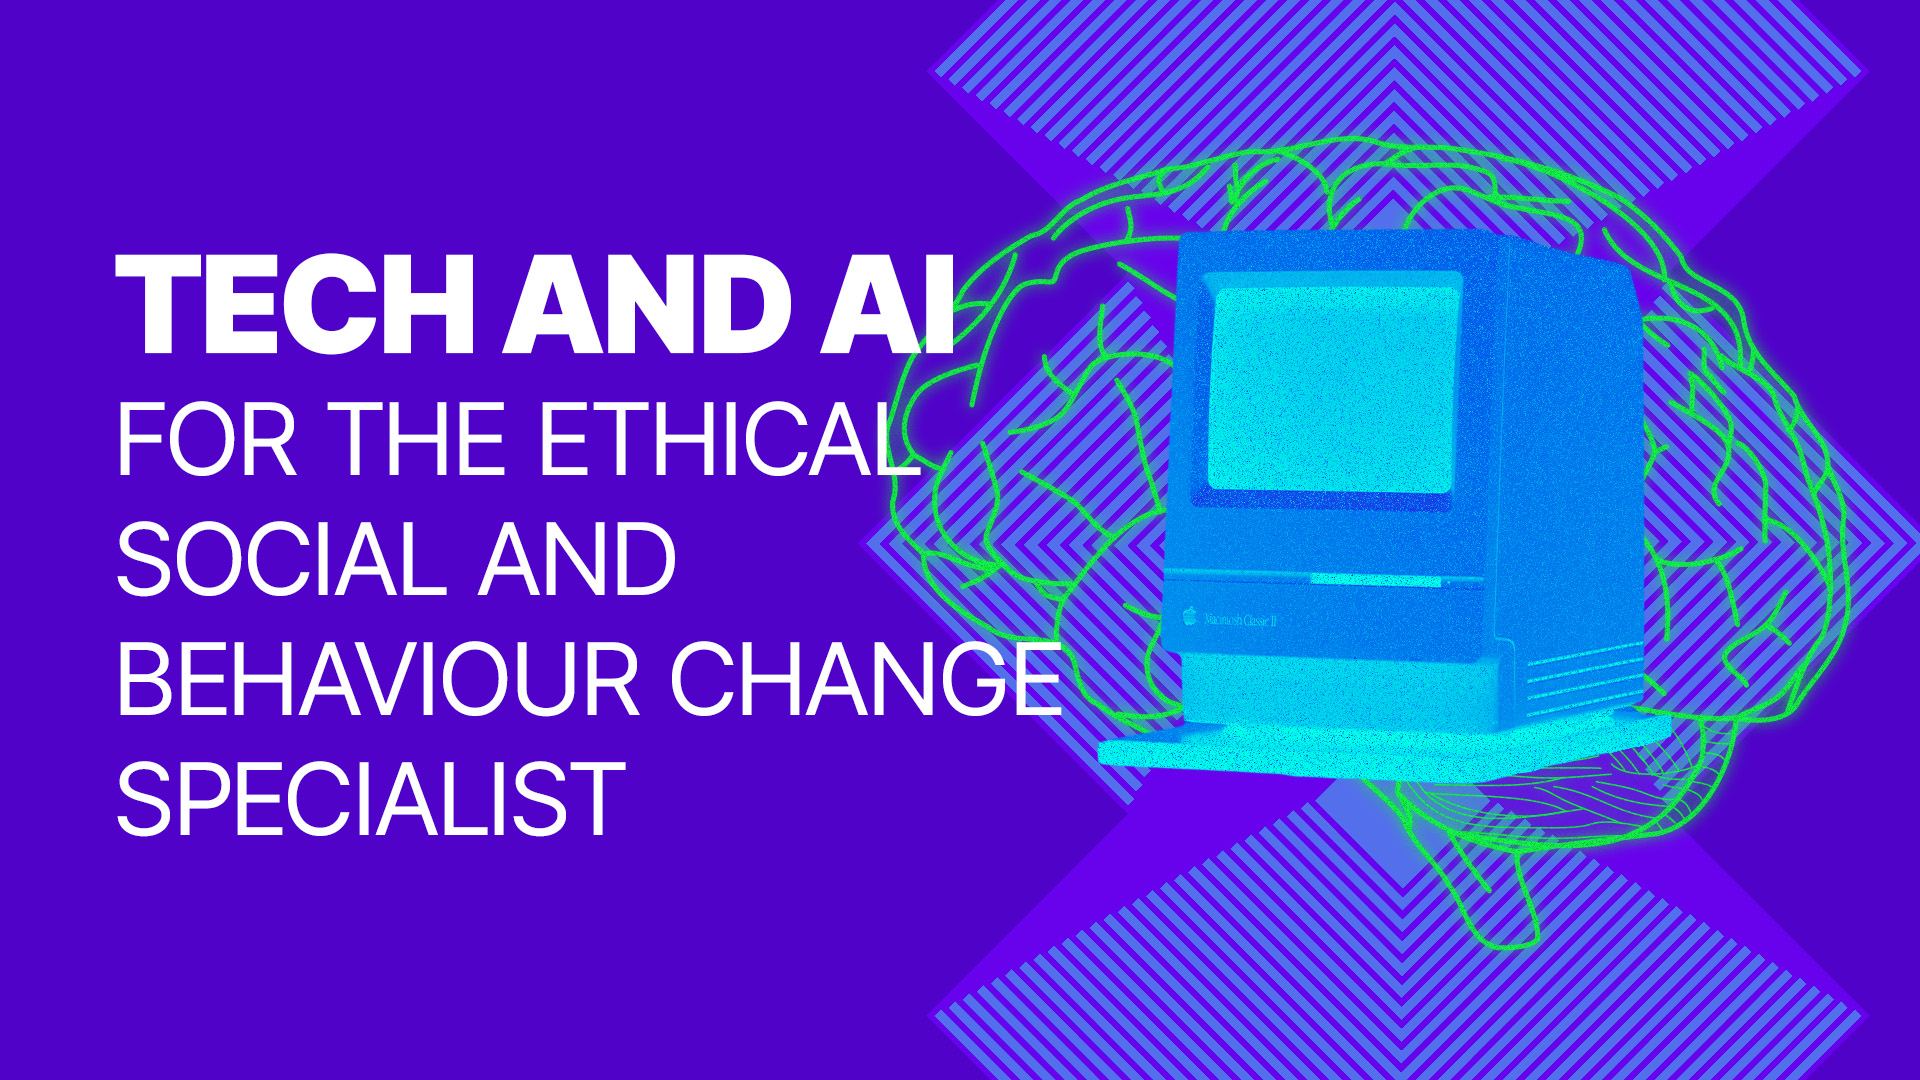 Empowering ethical social and behavior change specialists with technology and AI